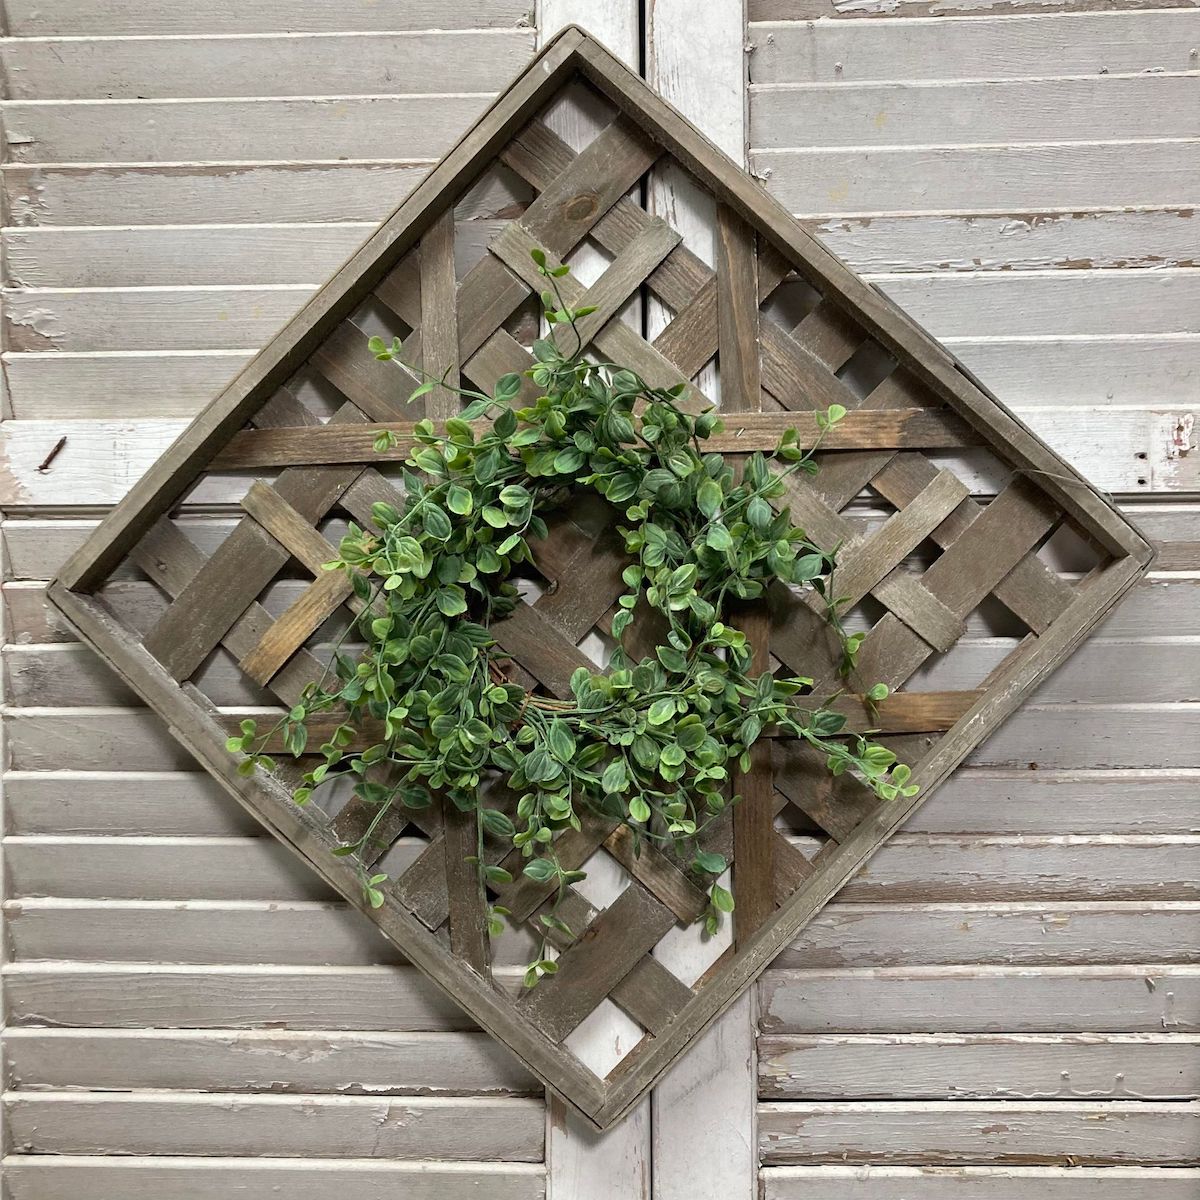 Greywashed Square Lattice Work Decorative Frame with a Vined Wreath